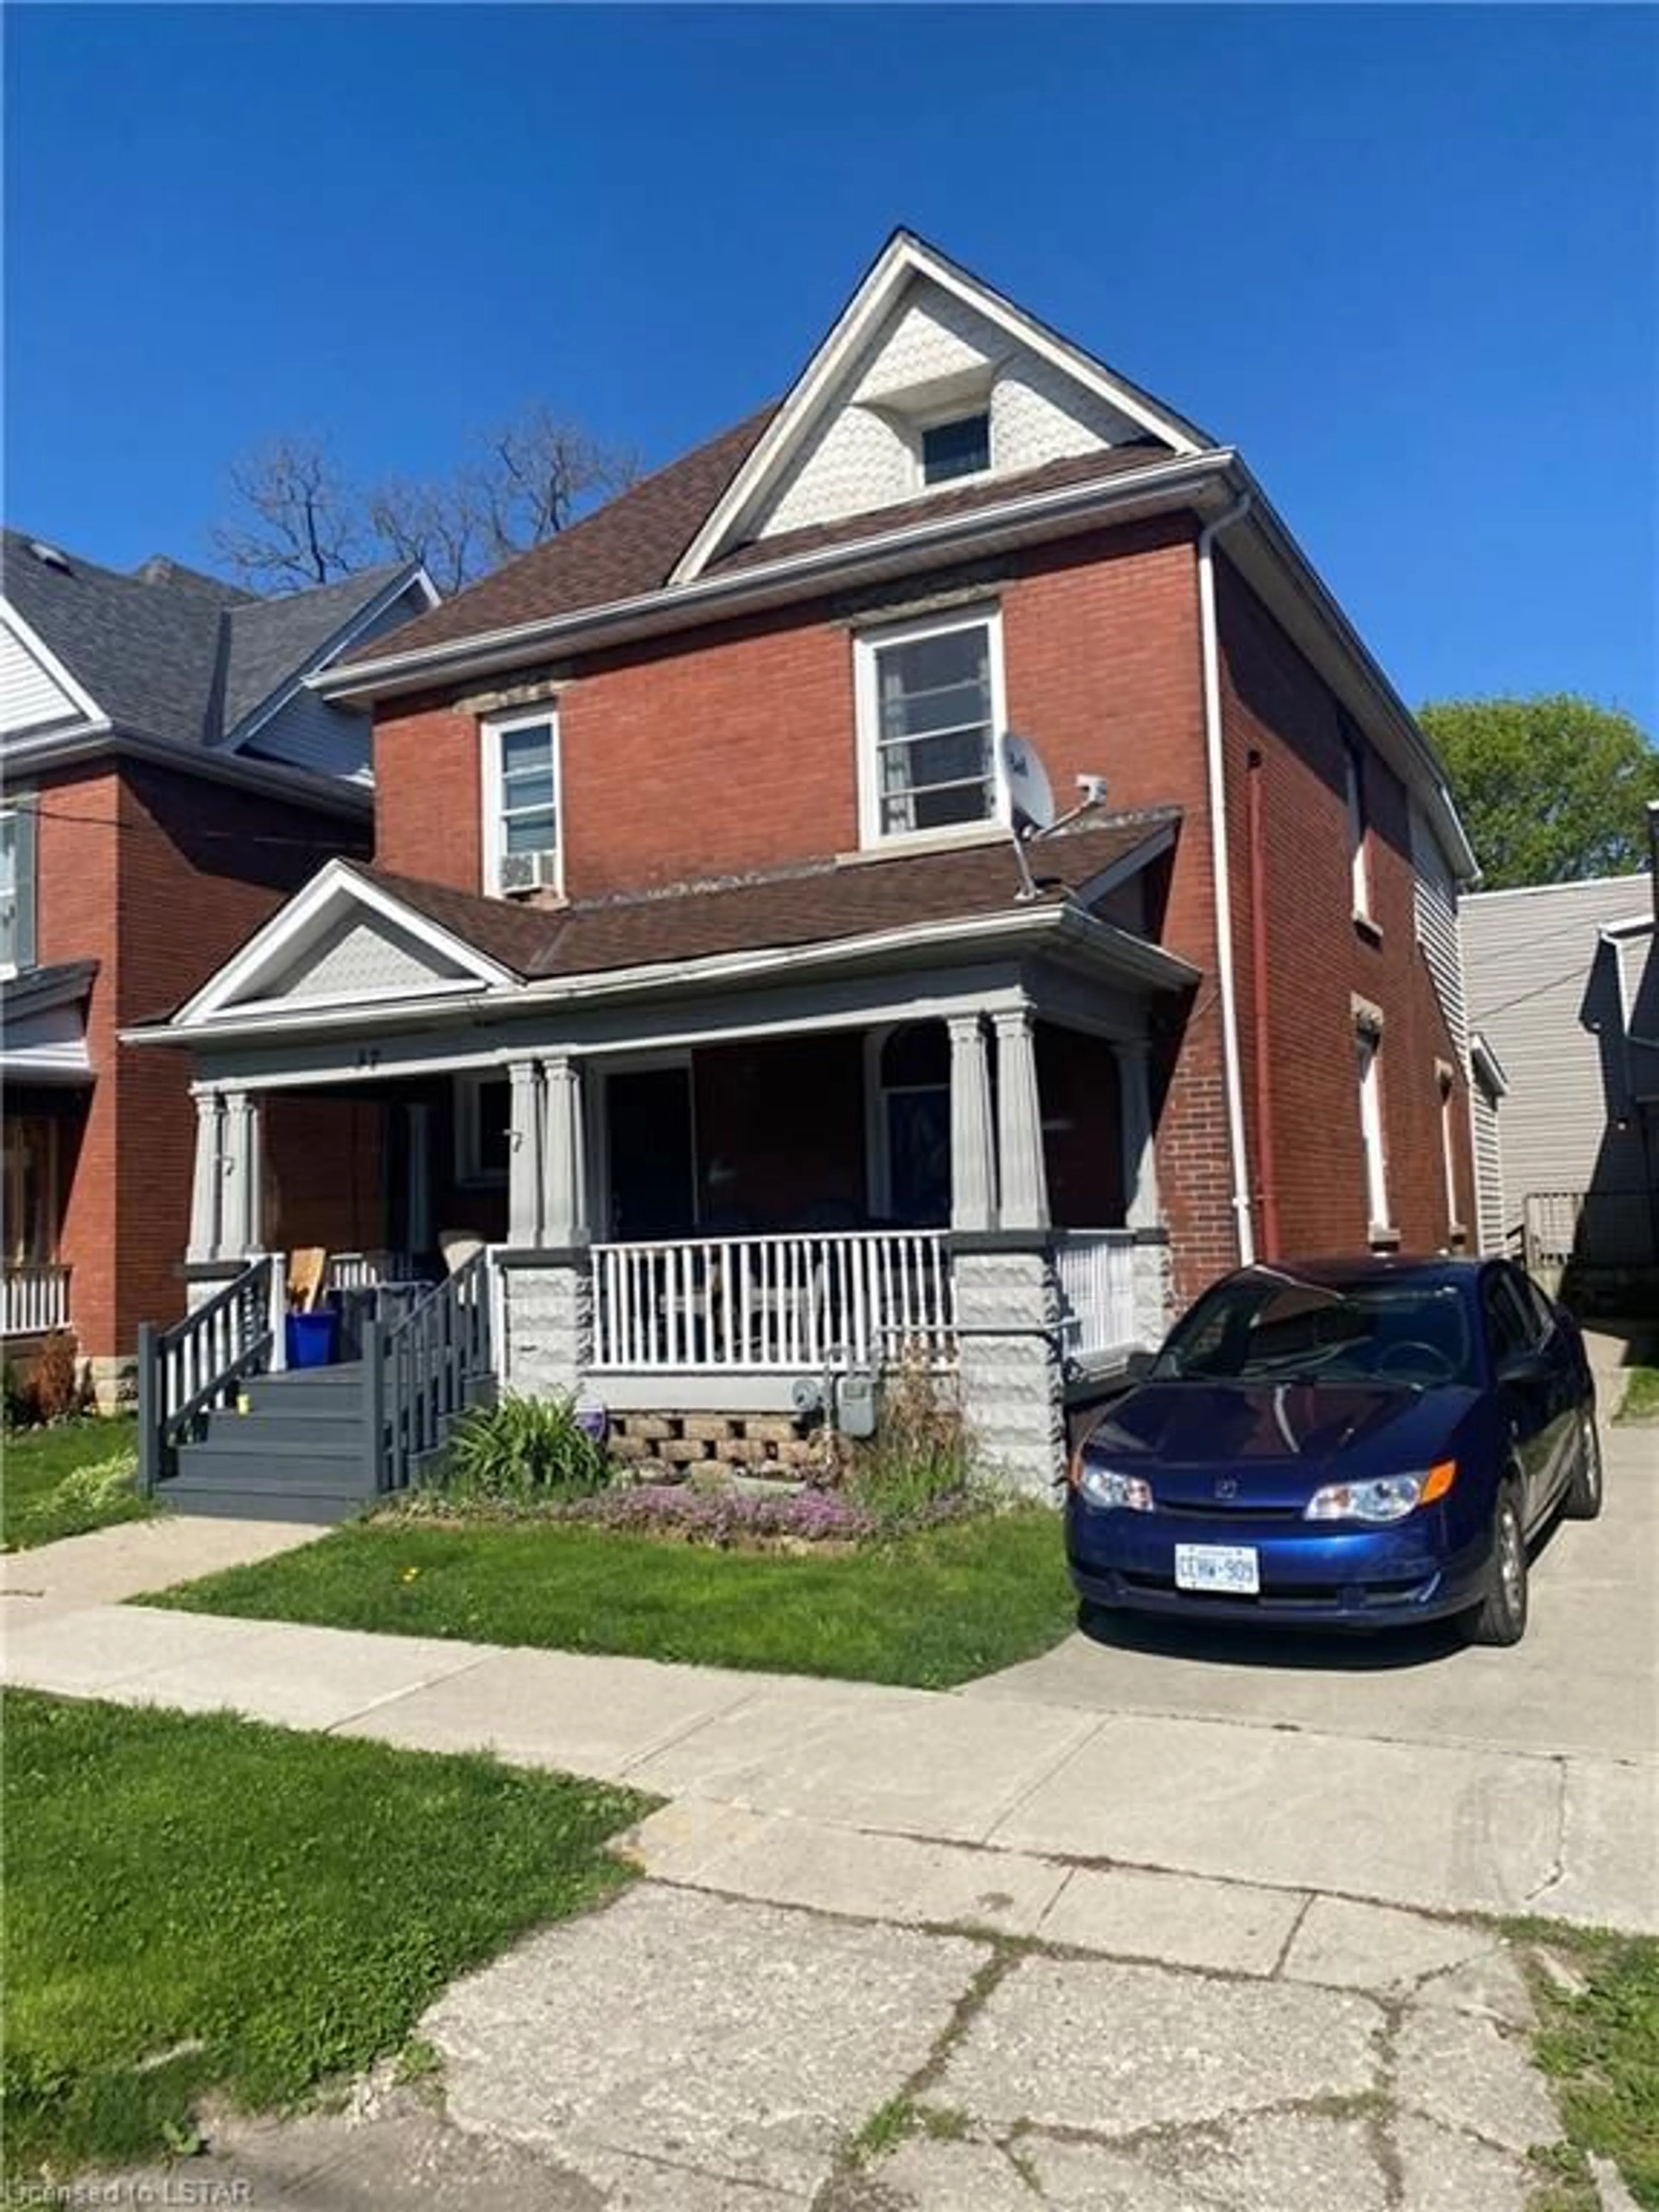 Frontside or backside of a home for 37 Metcalfe St, St. Thomas Ontario N5R 3K1